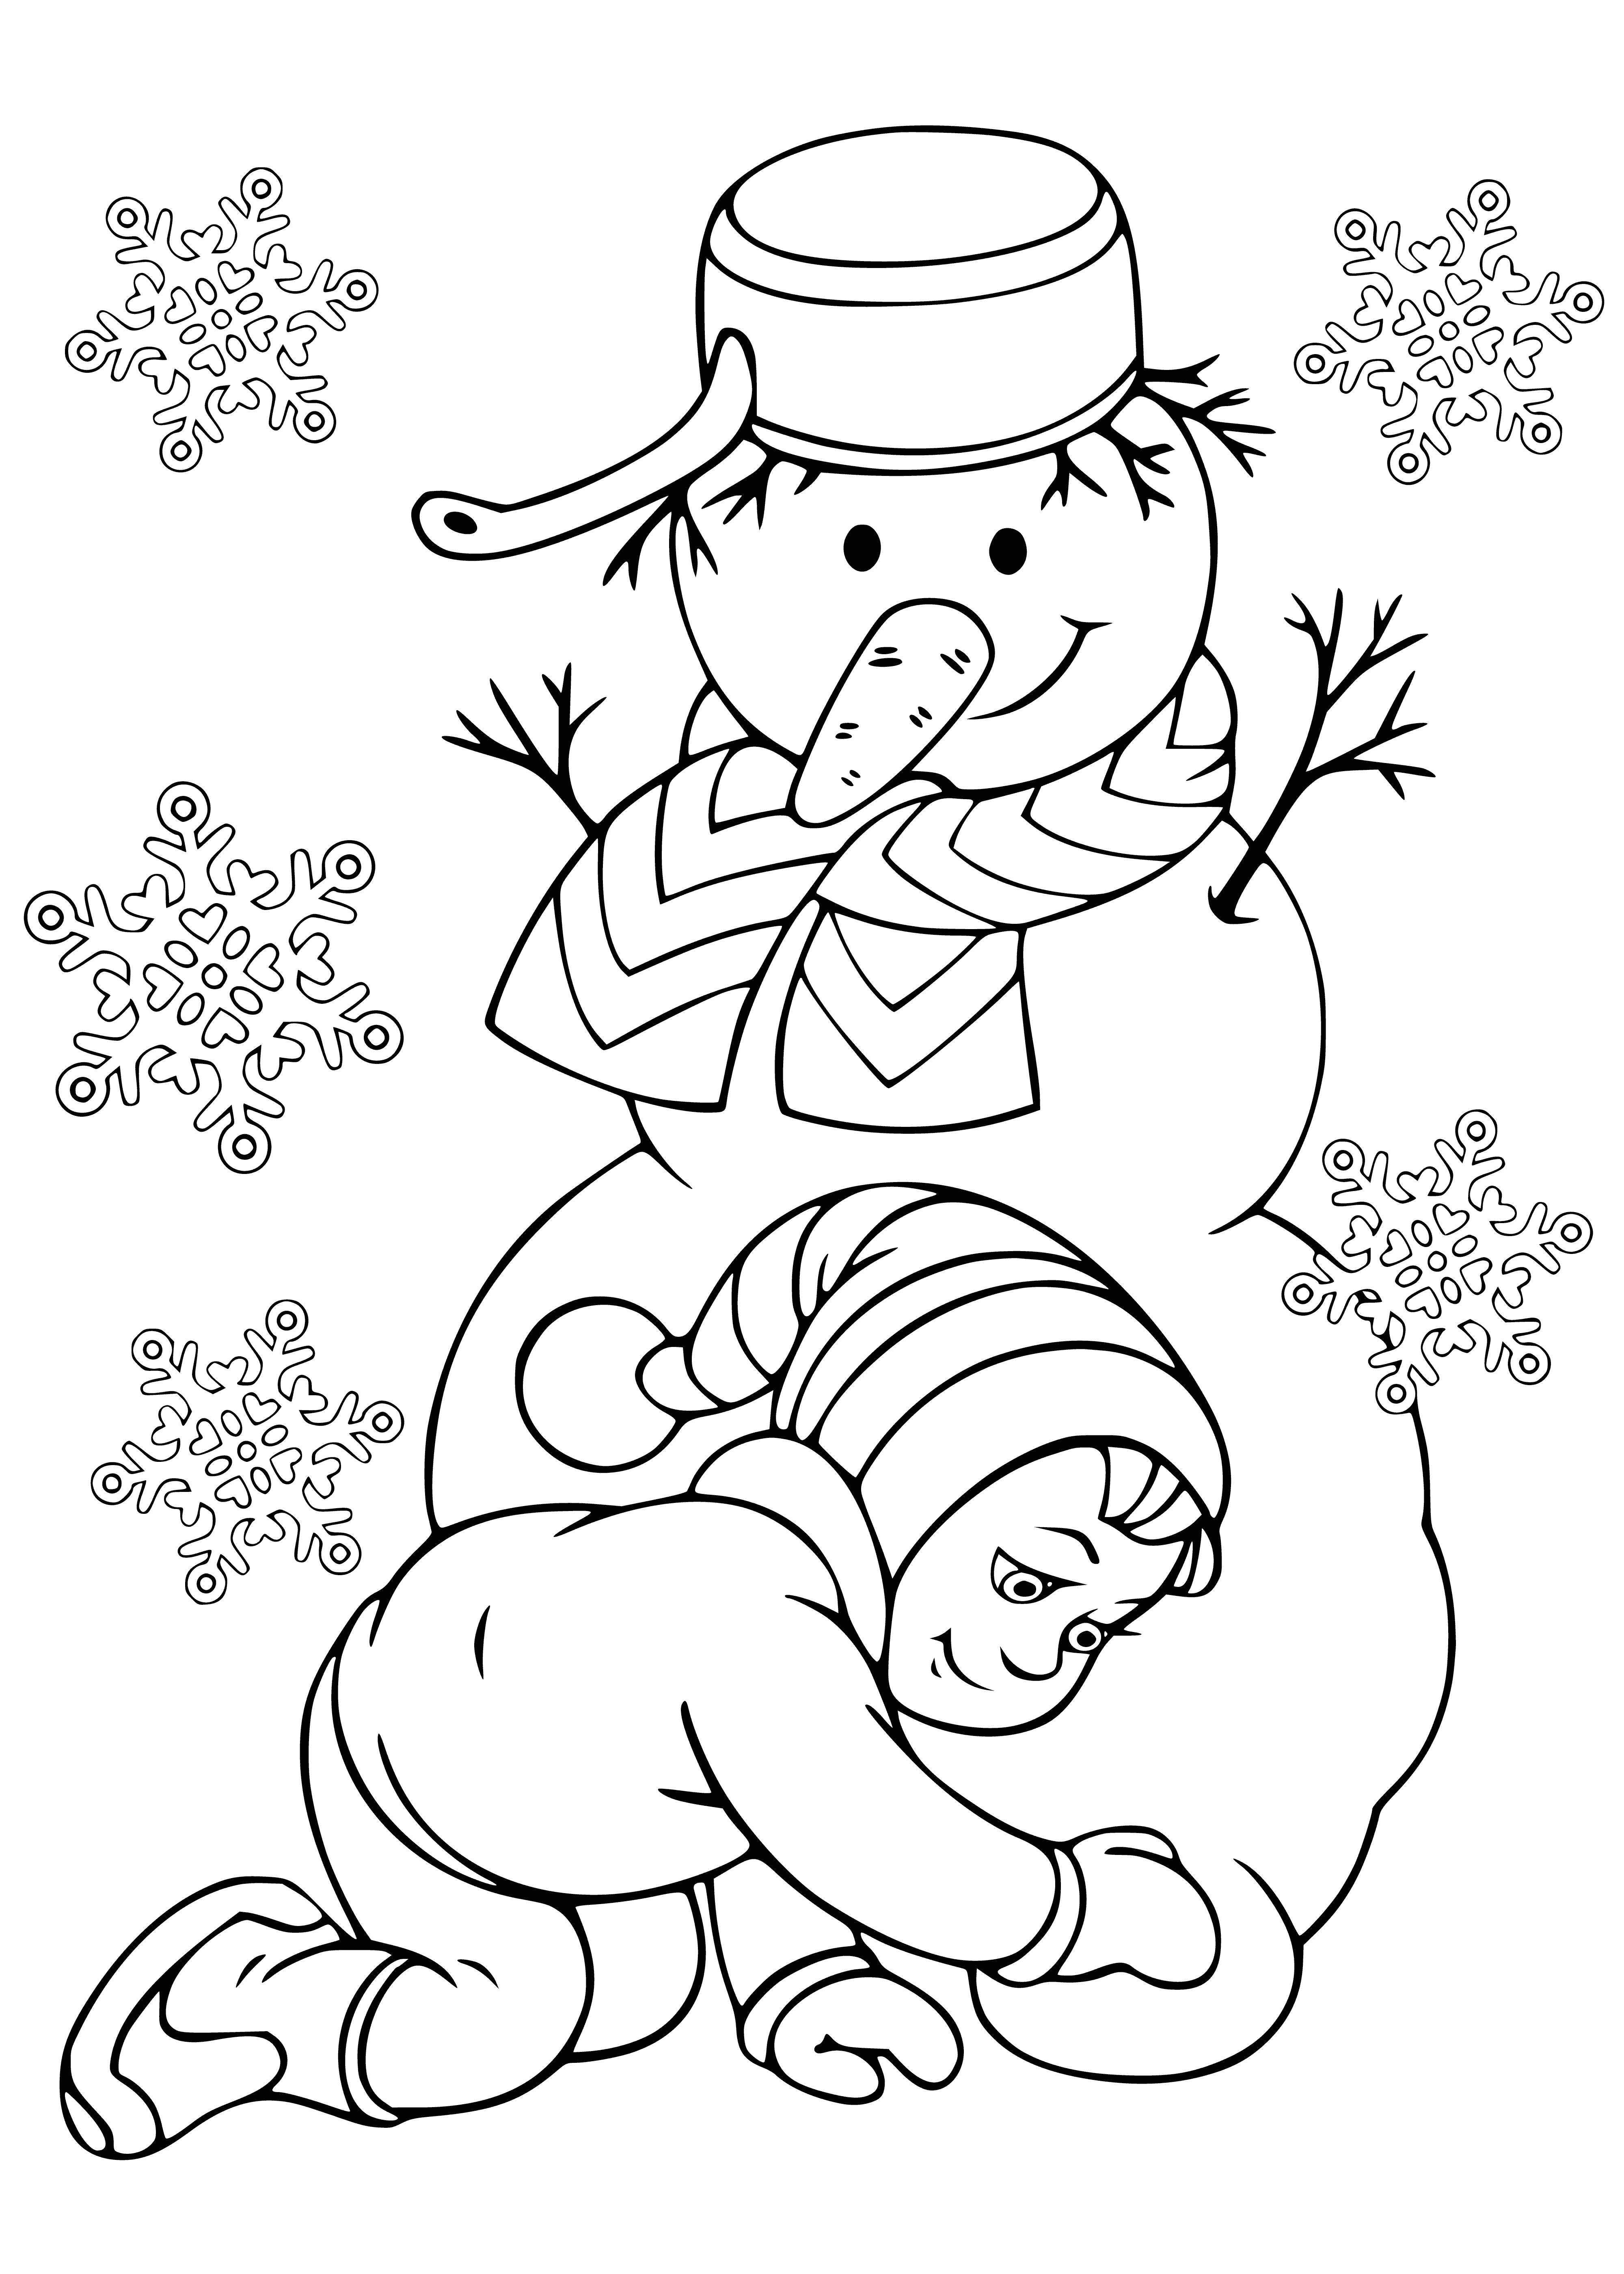 coloring page: Girl builds a snowman outside on a cold day w/scarf, hat, gloves; carrot nose, black stones for eyes, twig arms, candy cane in left hand.